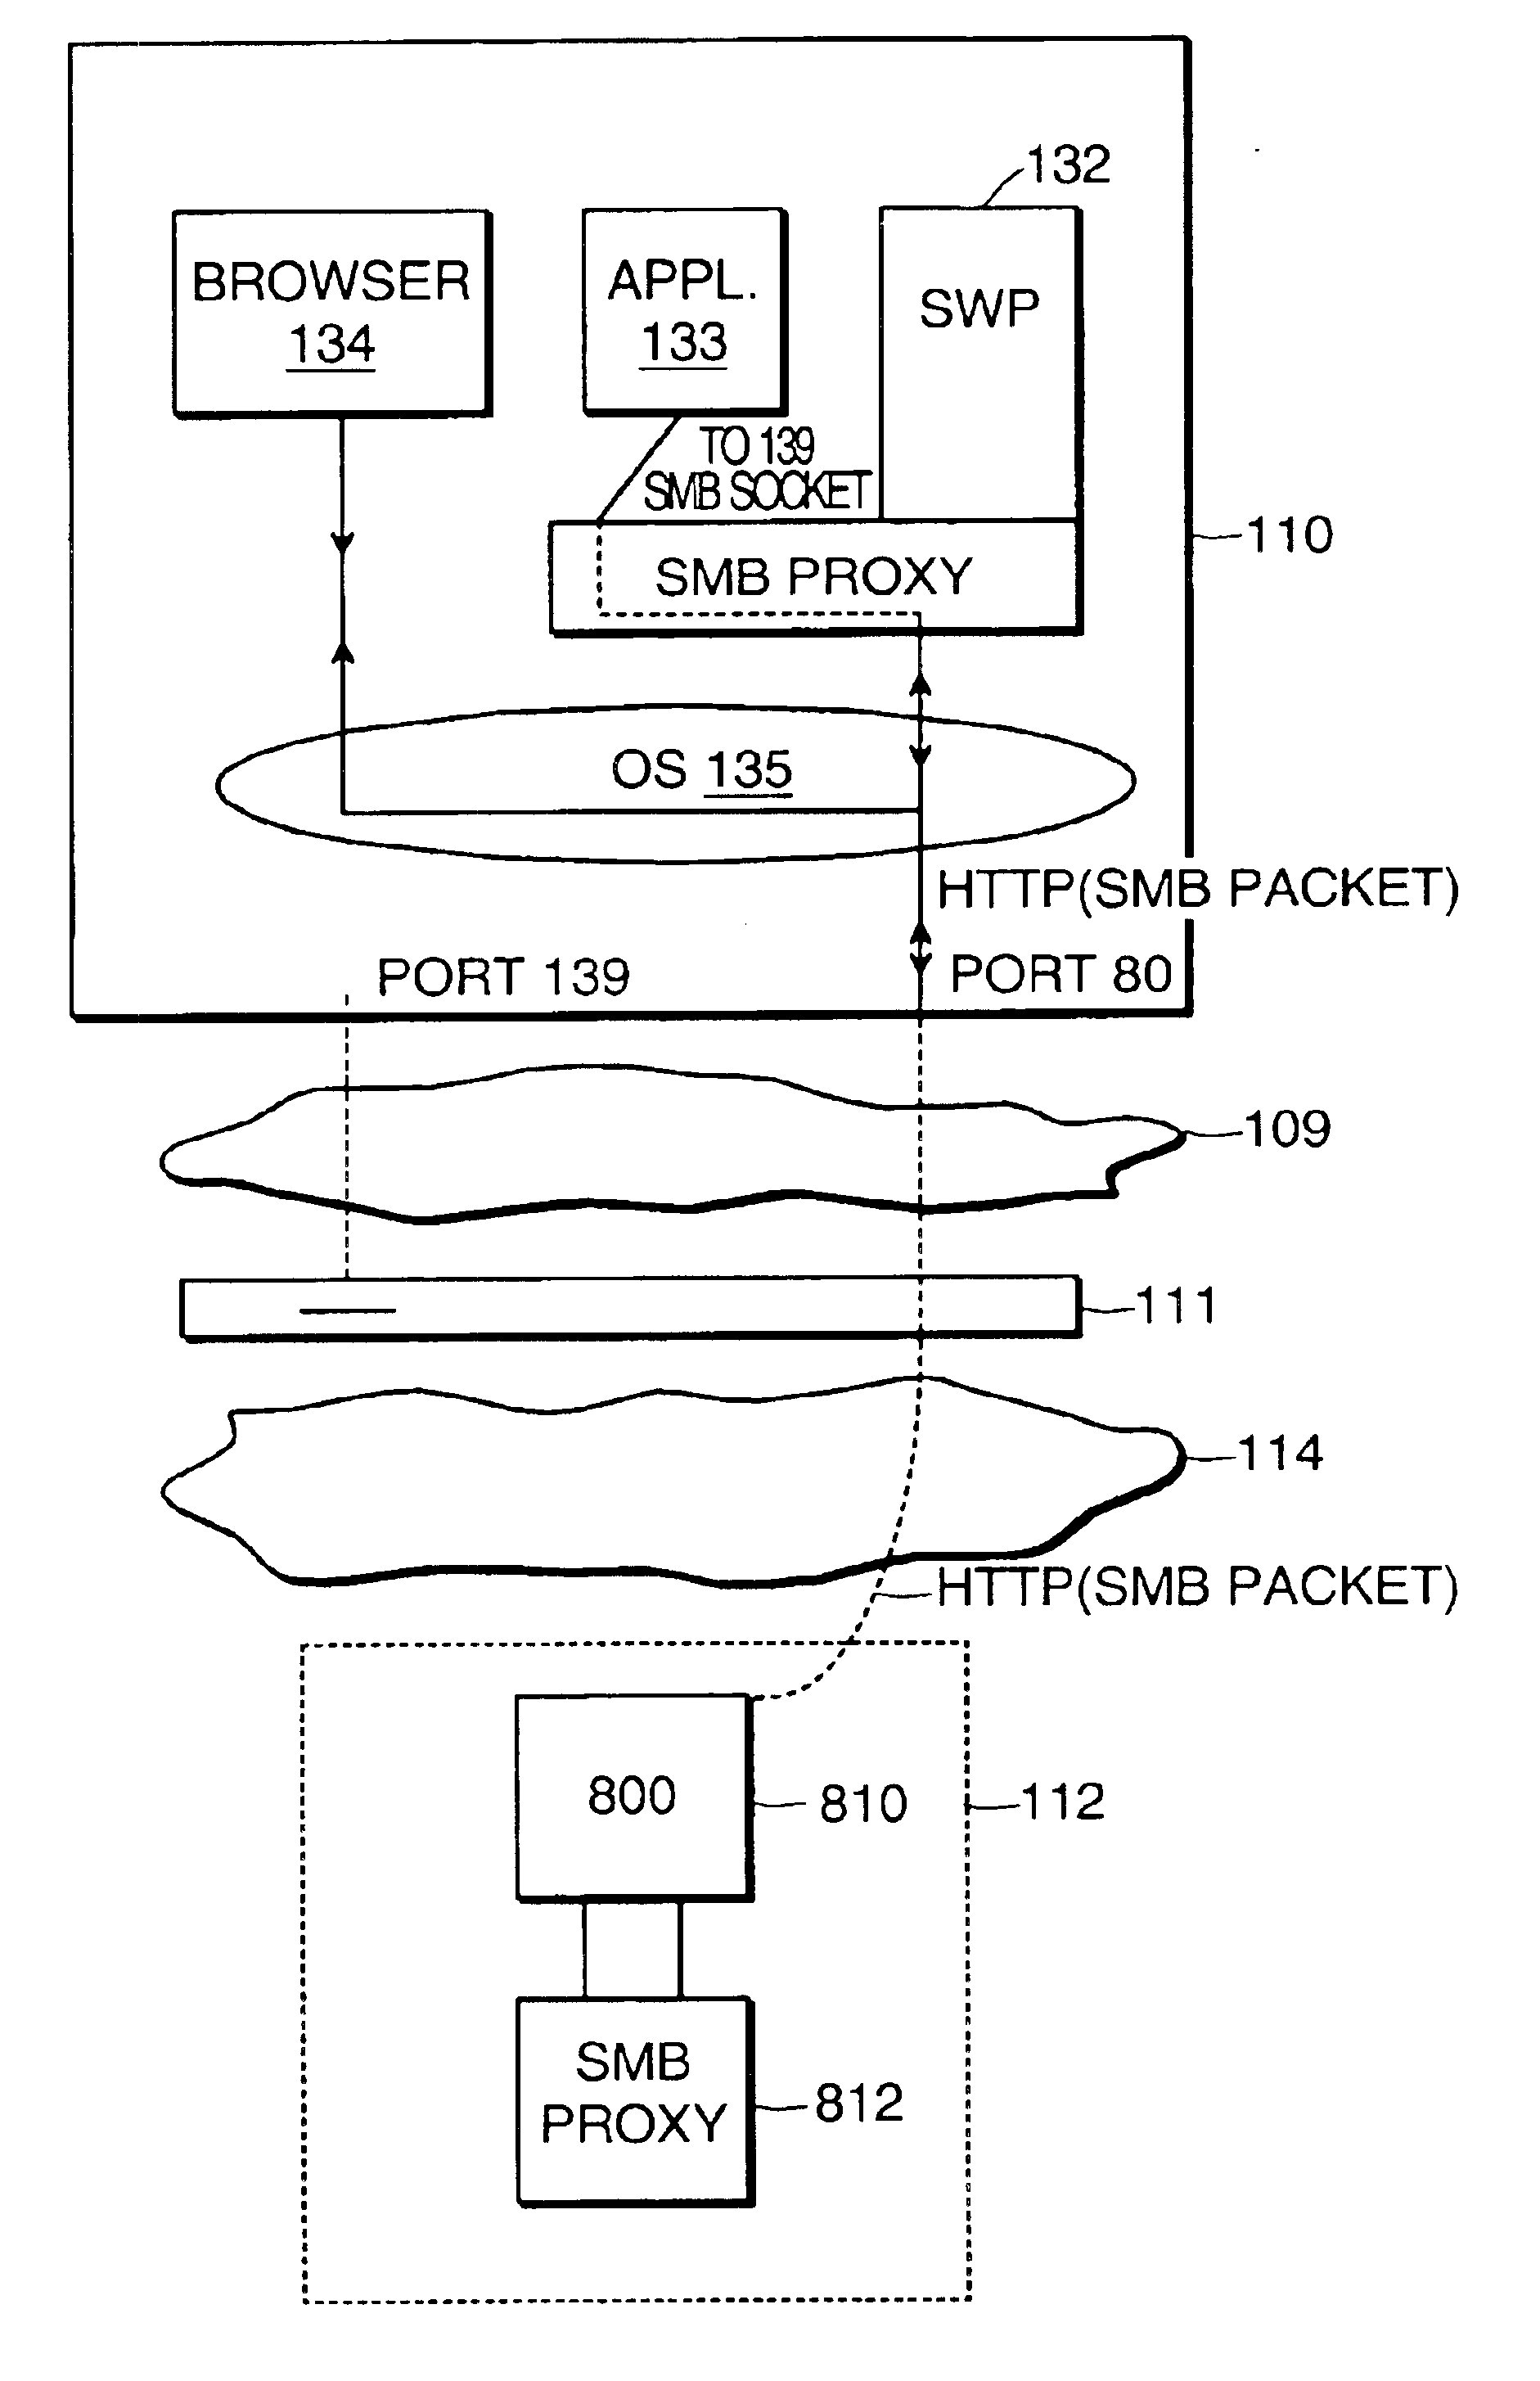 Method and system for remote networking using port proxying by detecting if the designated port on a client computer is blocked, then encapsulating the communications in a different format and redirecting to an open port